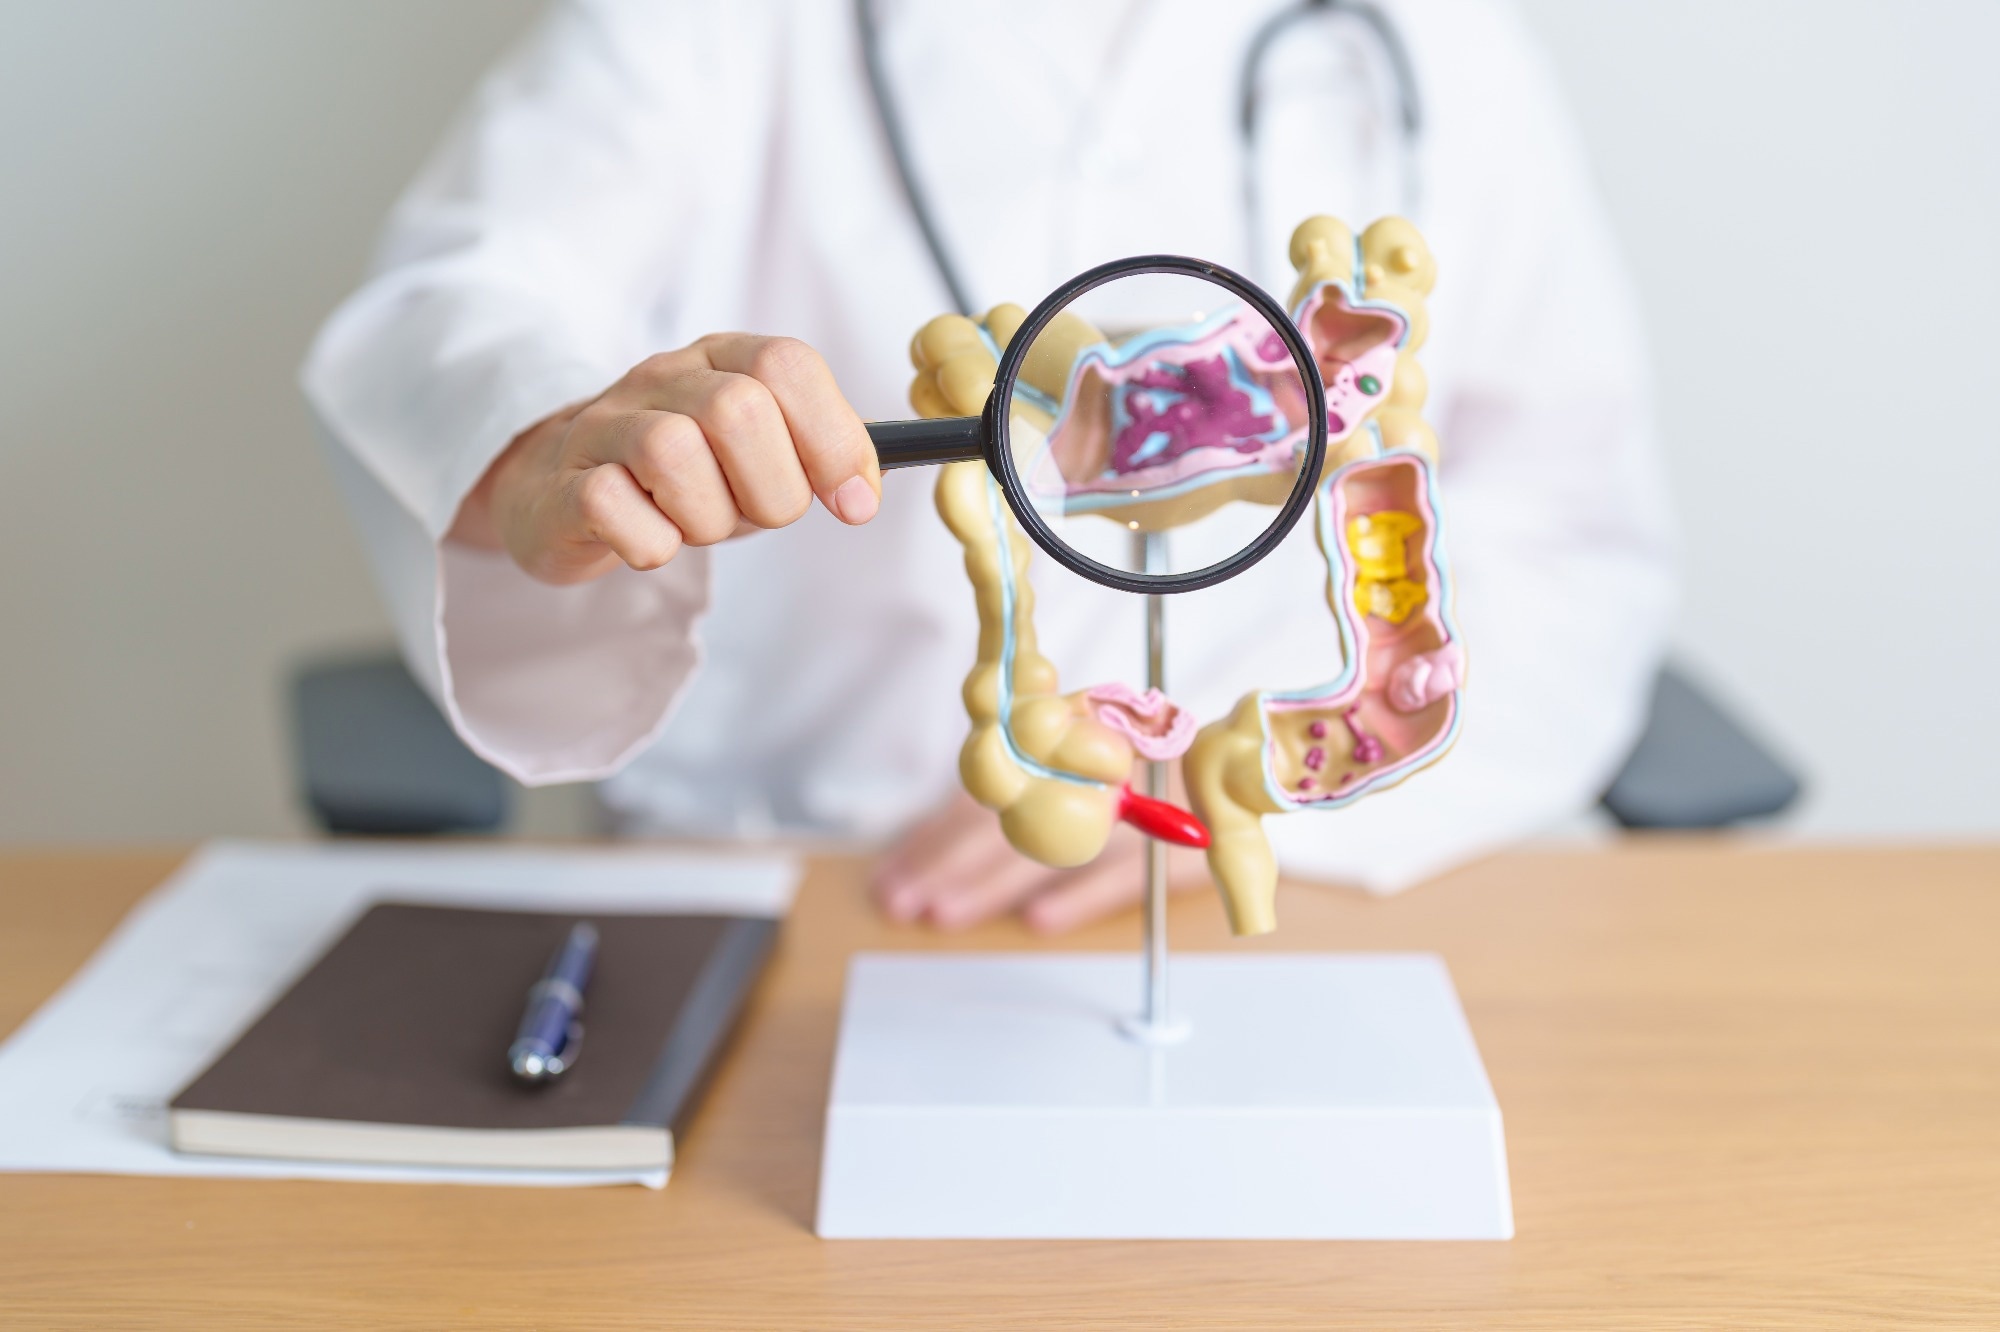 Study: Utilization of colorectal cancer screening tests across European countries: a cross-sectional analysis of the European health interview survey 2018–2020. Image Credit: Jo Panuwat D/Shutterstock.com